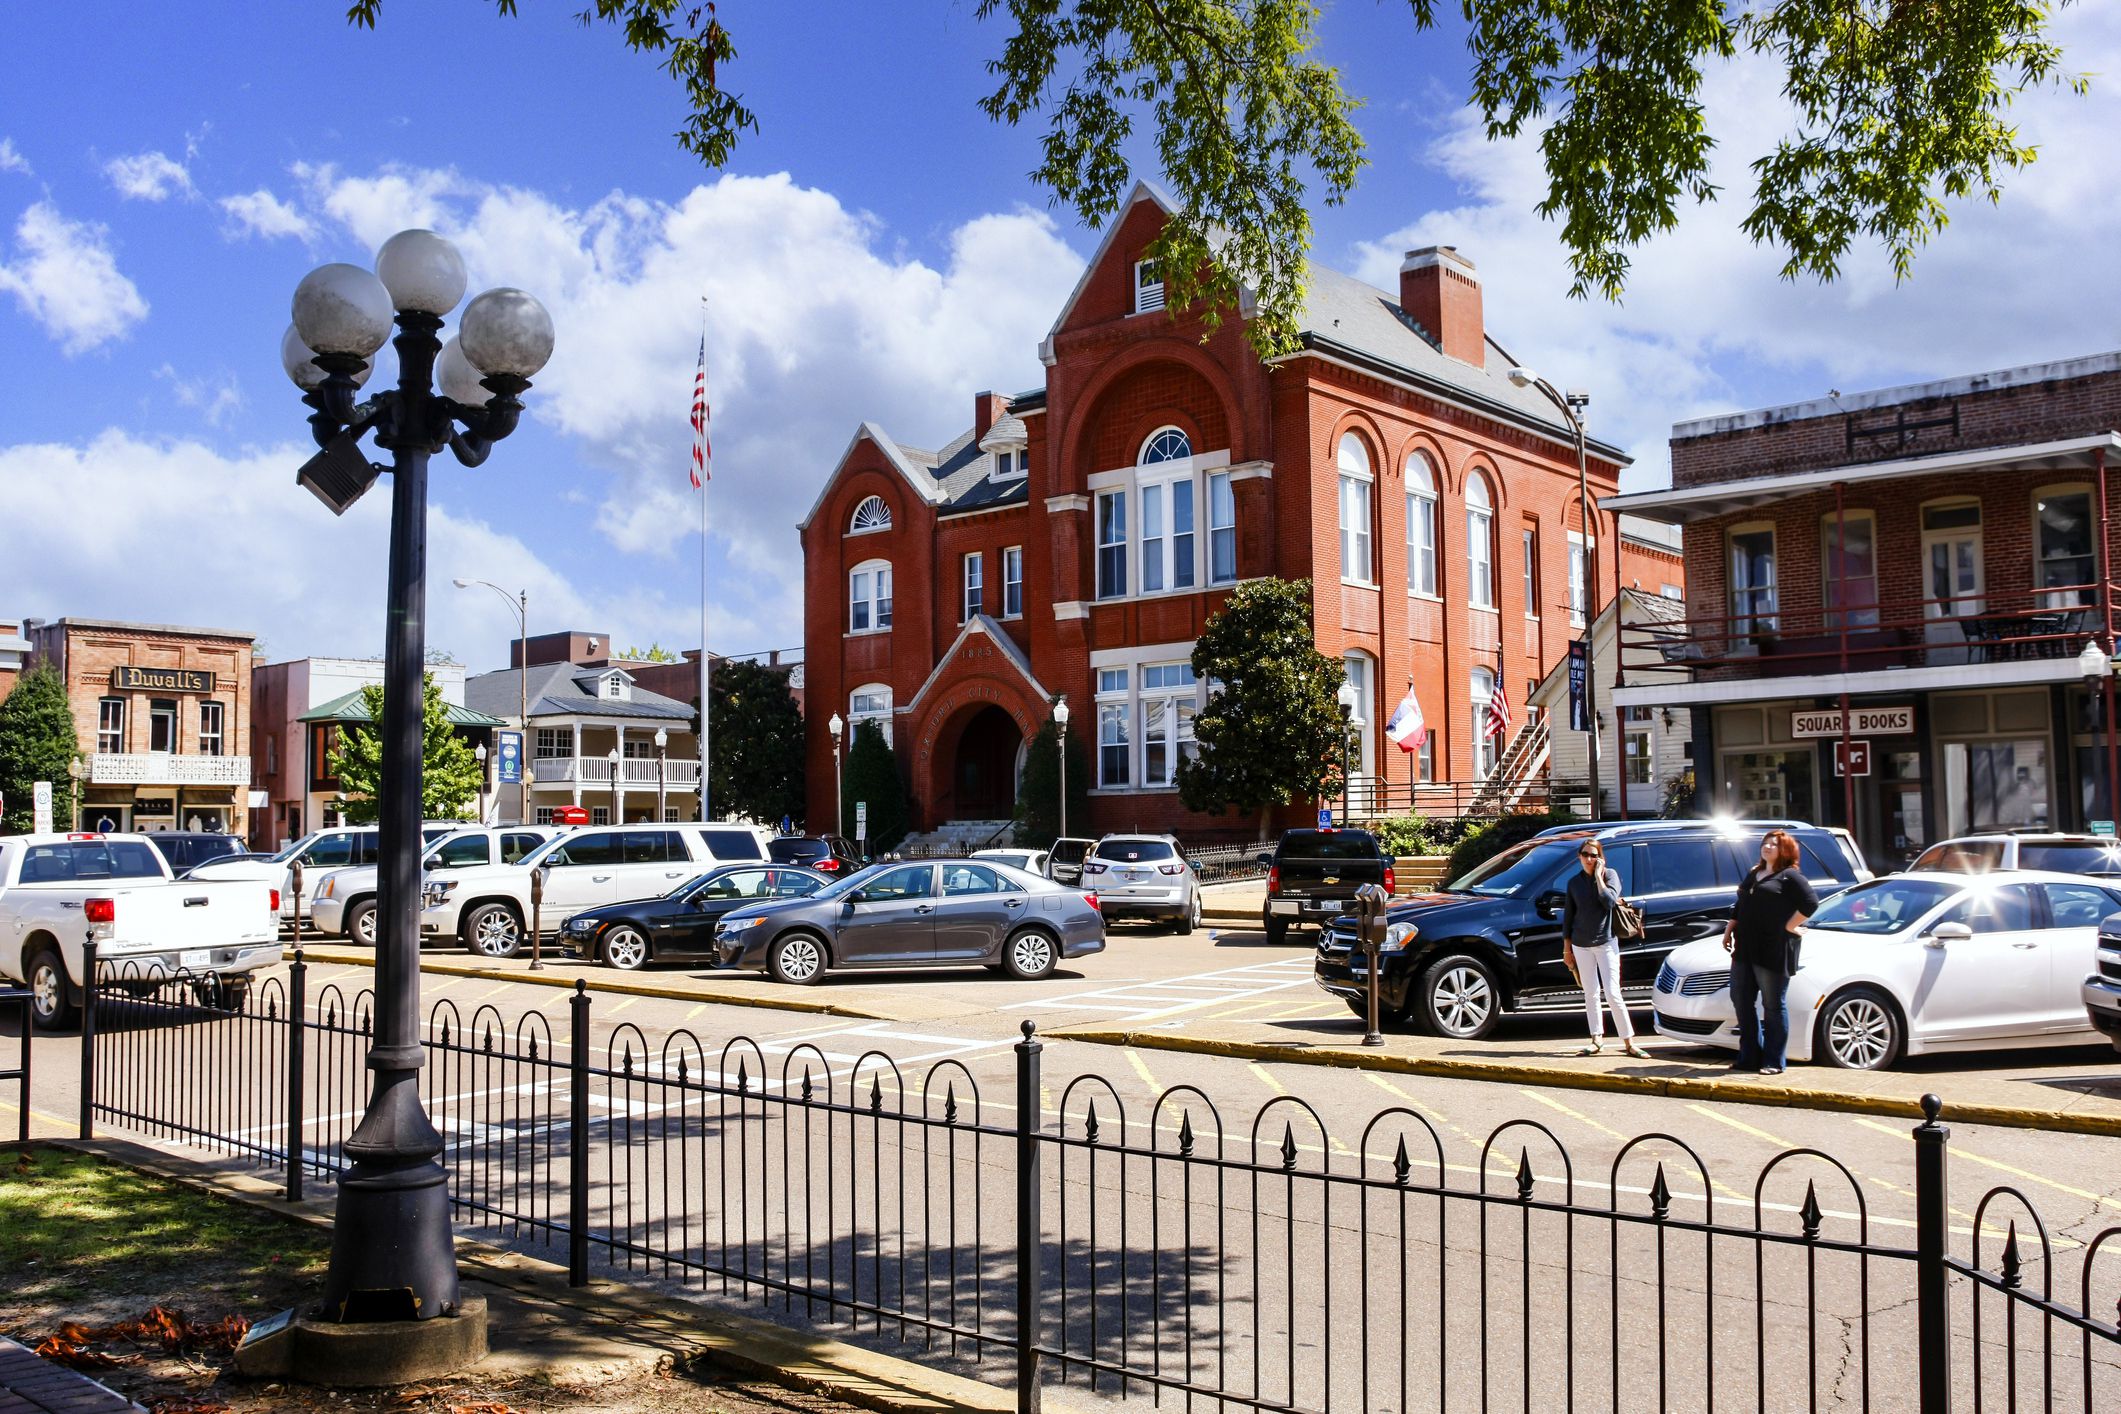 <p>With the birthplace of American music in the north, charming beach towns in the south, and natural beauty, a rich history, and warm hospitality in every corner, Mississippi has a lot to offer. But perhaps one of the state’s biggest draws is its affordability.</p><p>Though Mississippi is the poorest state in the nation, it’s also the least expensive place to live. The cost of living is 14% lower than the national average, which means car fill-ups, grocery store runs, and utility bills cost less than they would elsewhere. Housing costs run 40% below what the average American pays, thanks in large part to an abundance of land, low property taxes, and low rents.</p><p class="u-margin-bottom">This is all welcome news if you’re in search of an economical place to start a career, raise a family, or retire. Below, we take a closer look at some of the best places to live in Mississippi.</p>